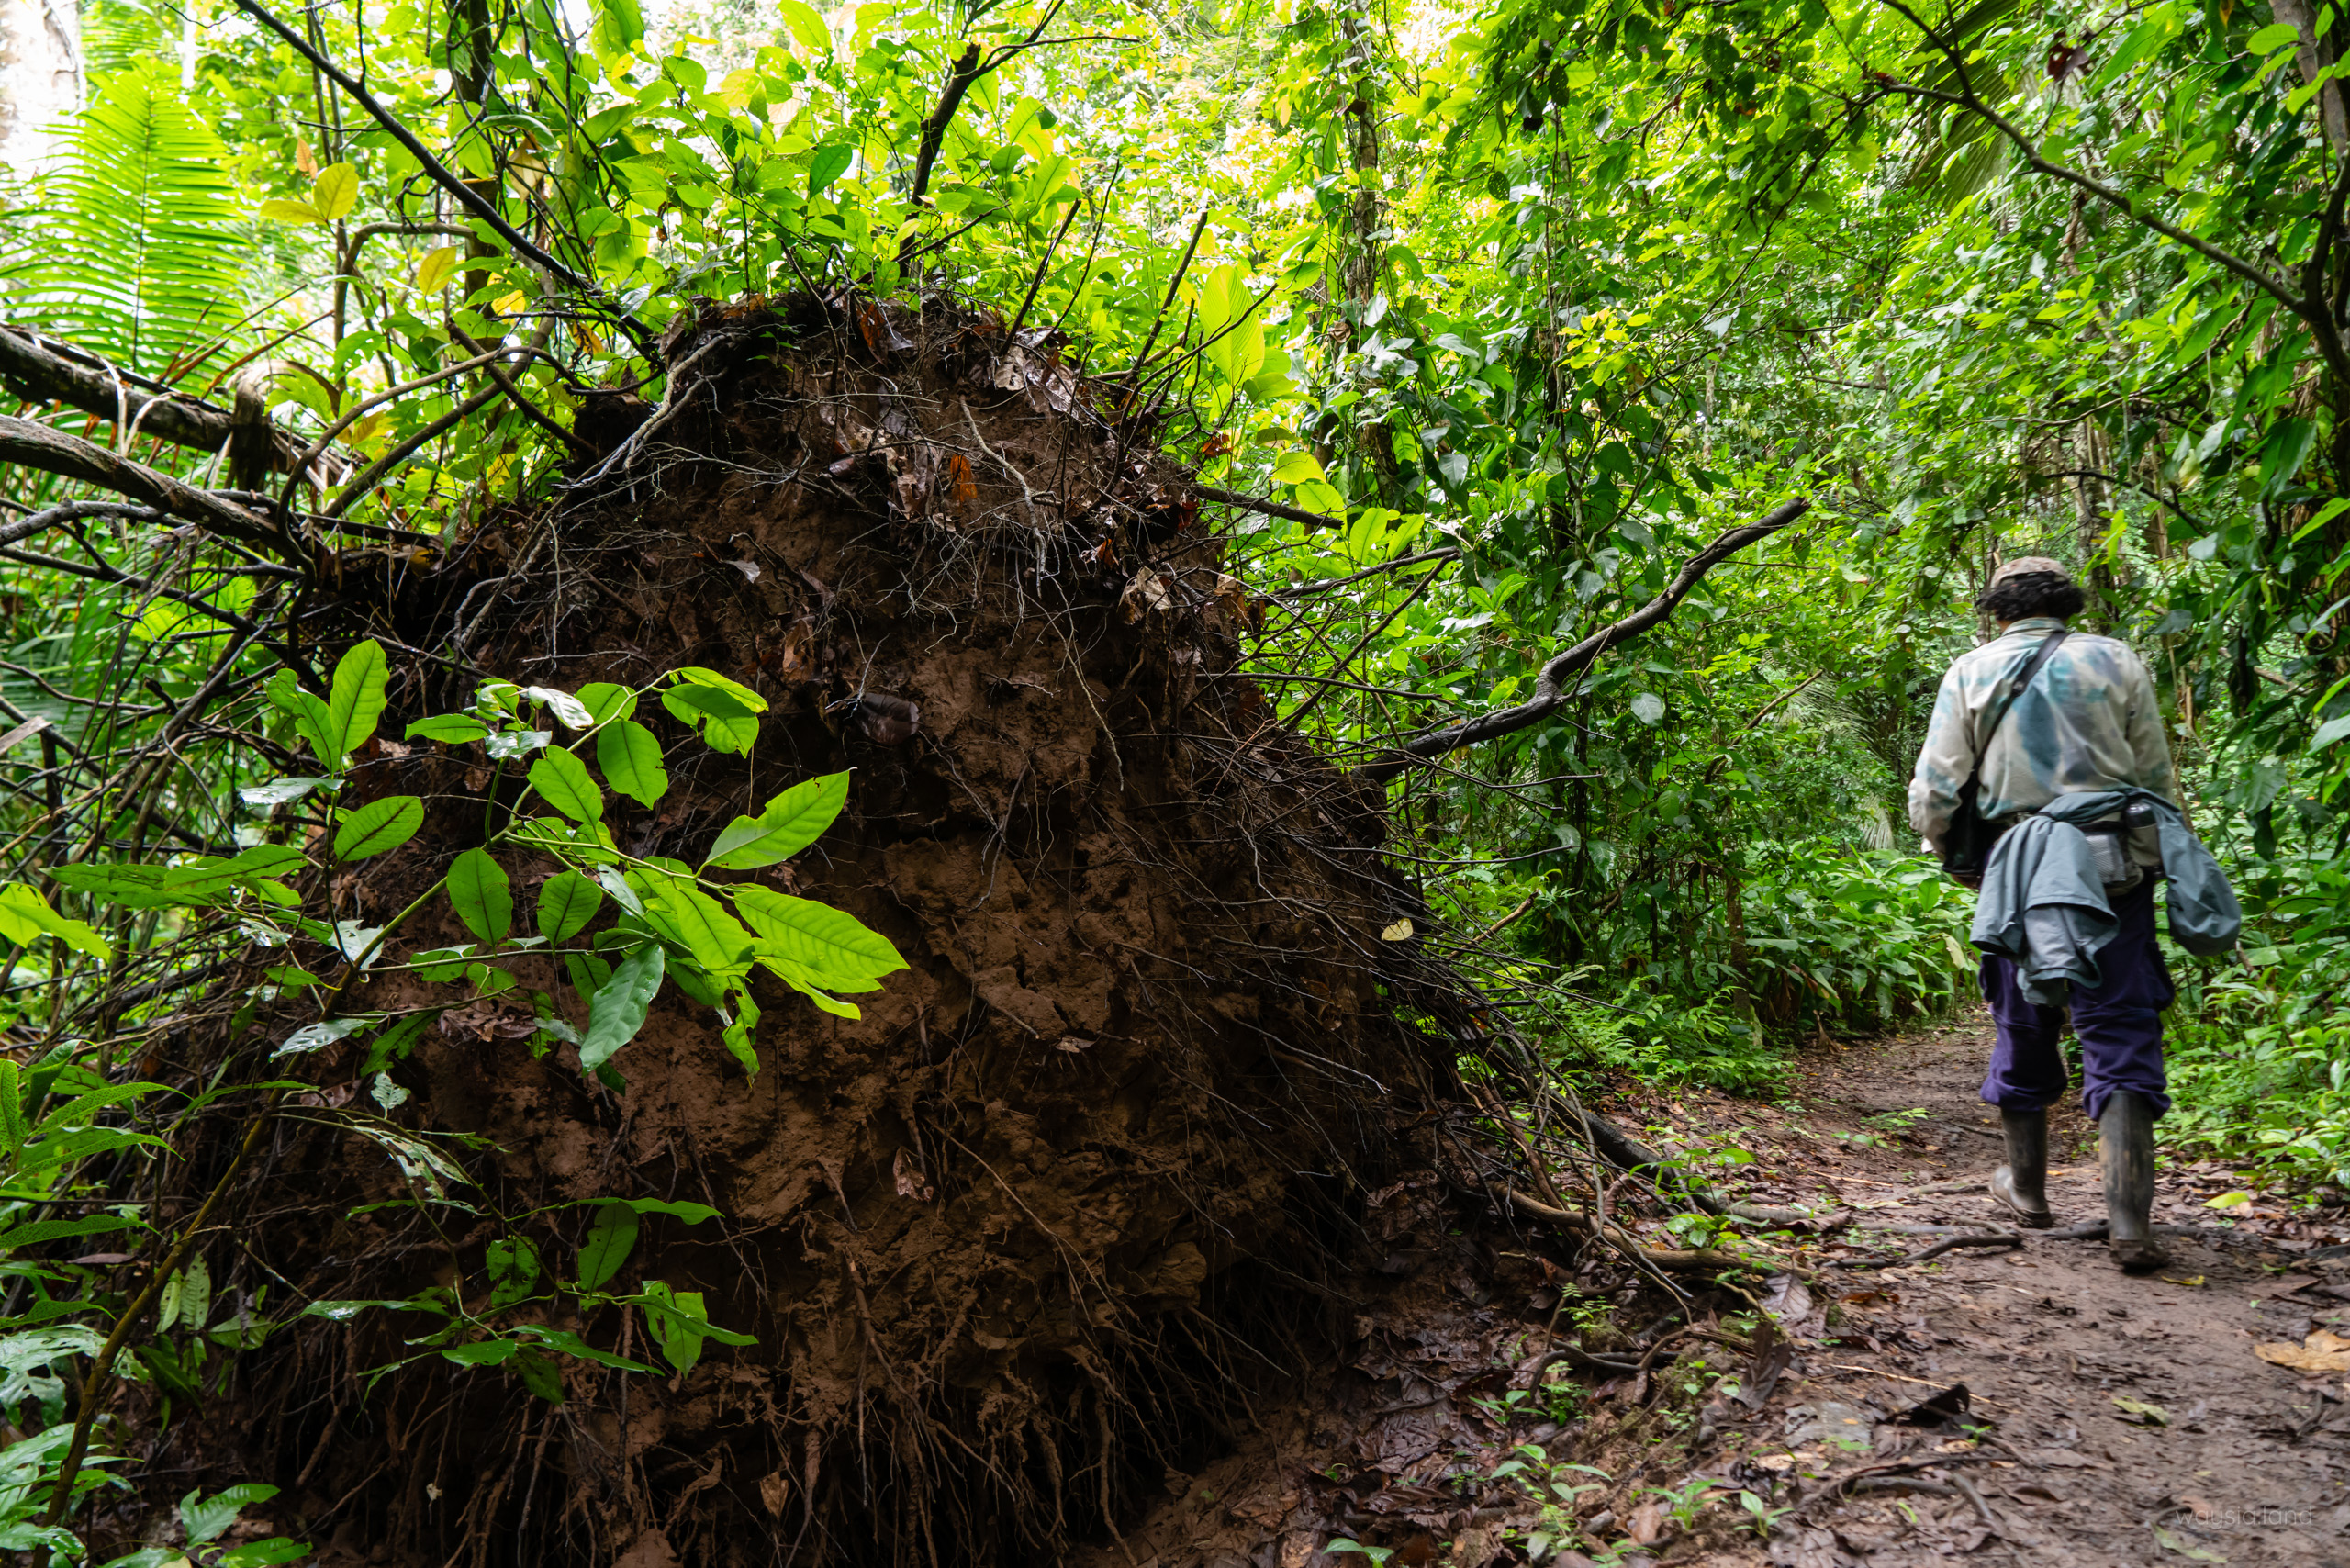 Shallow root system of Amazon trees